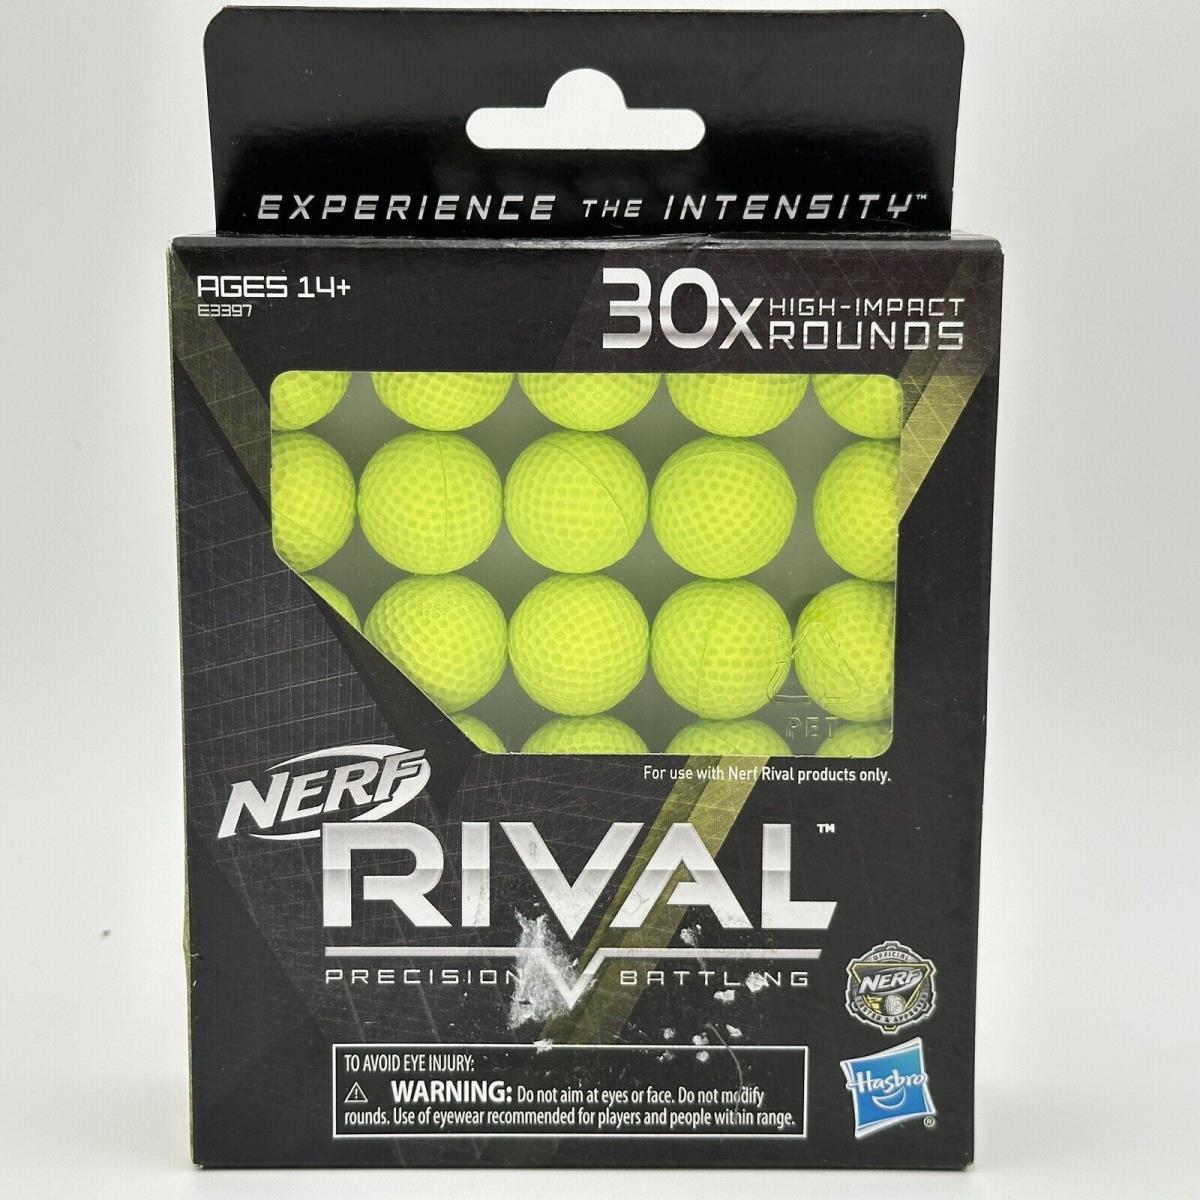 6-Packs Nerf Rival Edge Series of 30 High Impact Rounds Total 180 Green Balls